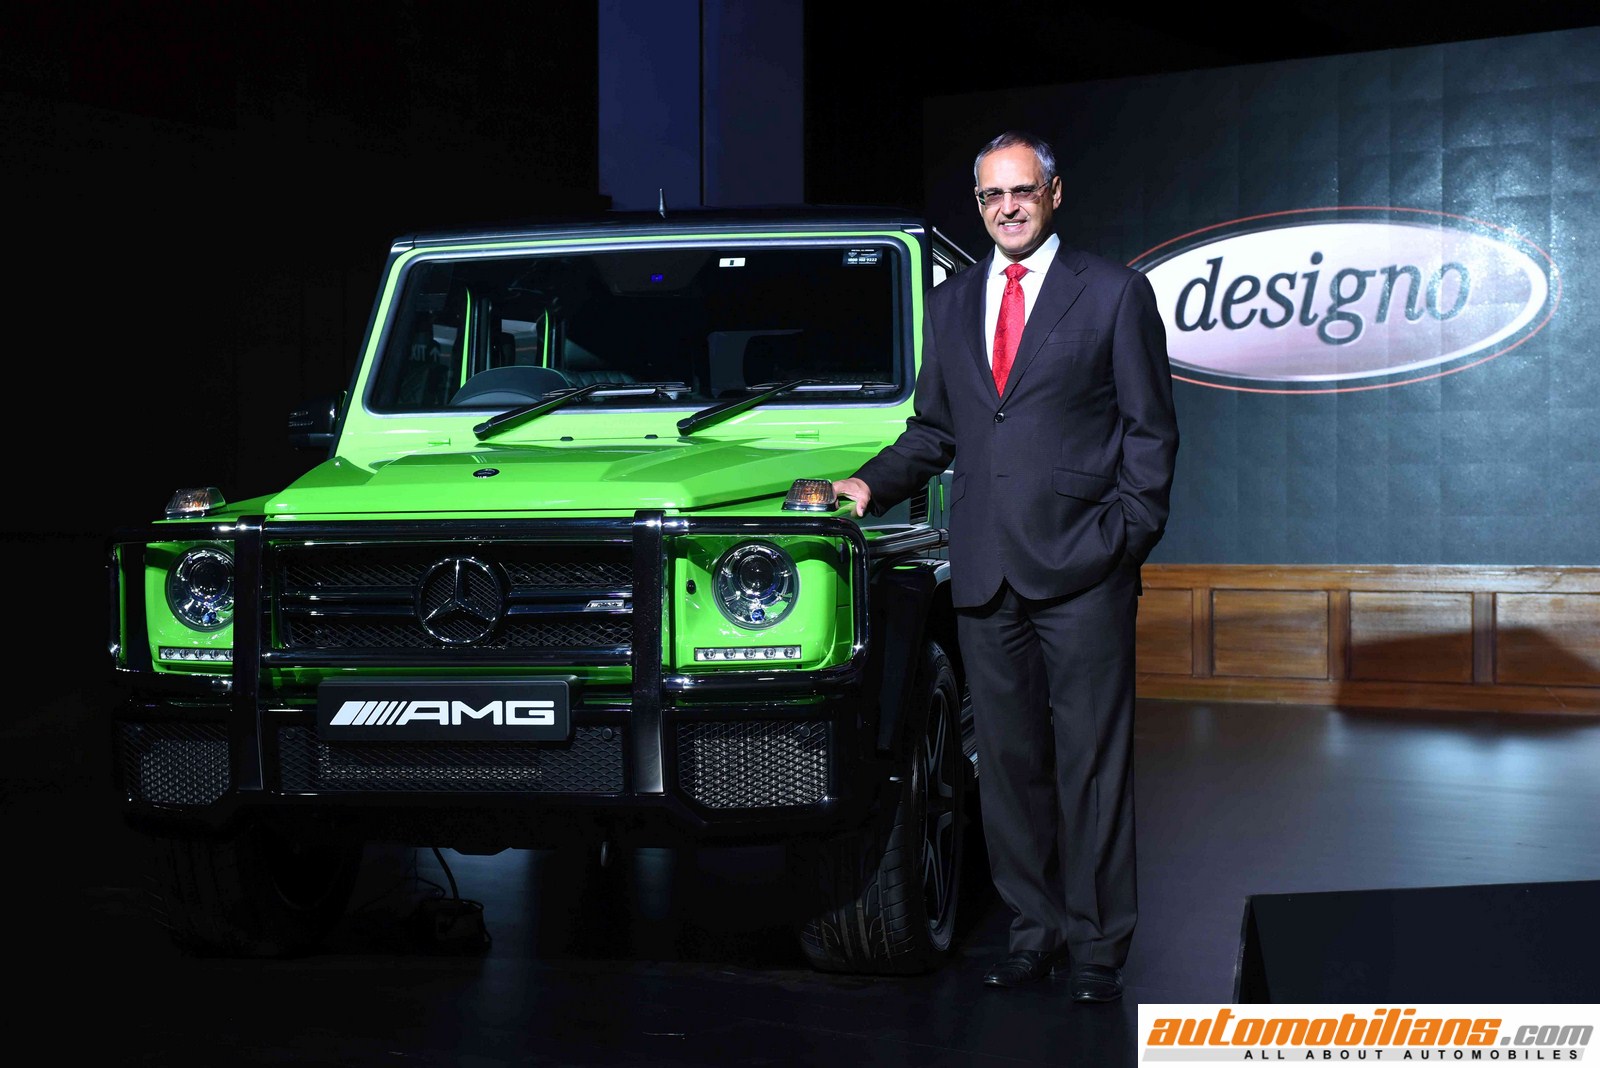 Mercedes-Benz AMG G 63 ‘Crazy Colour’ Edition, S 500 Coupé & AMG S 63 Coupé Launched In India At Rs. 2.17 Crores, Rs. 2 Crores & Rs. 2.60 Crores Respectively (Ex-Showroom, Delhi)